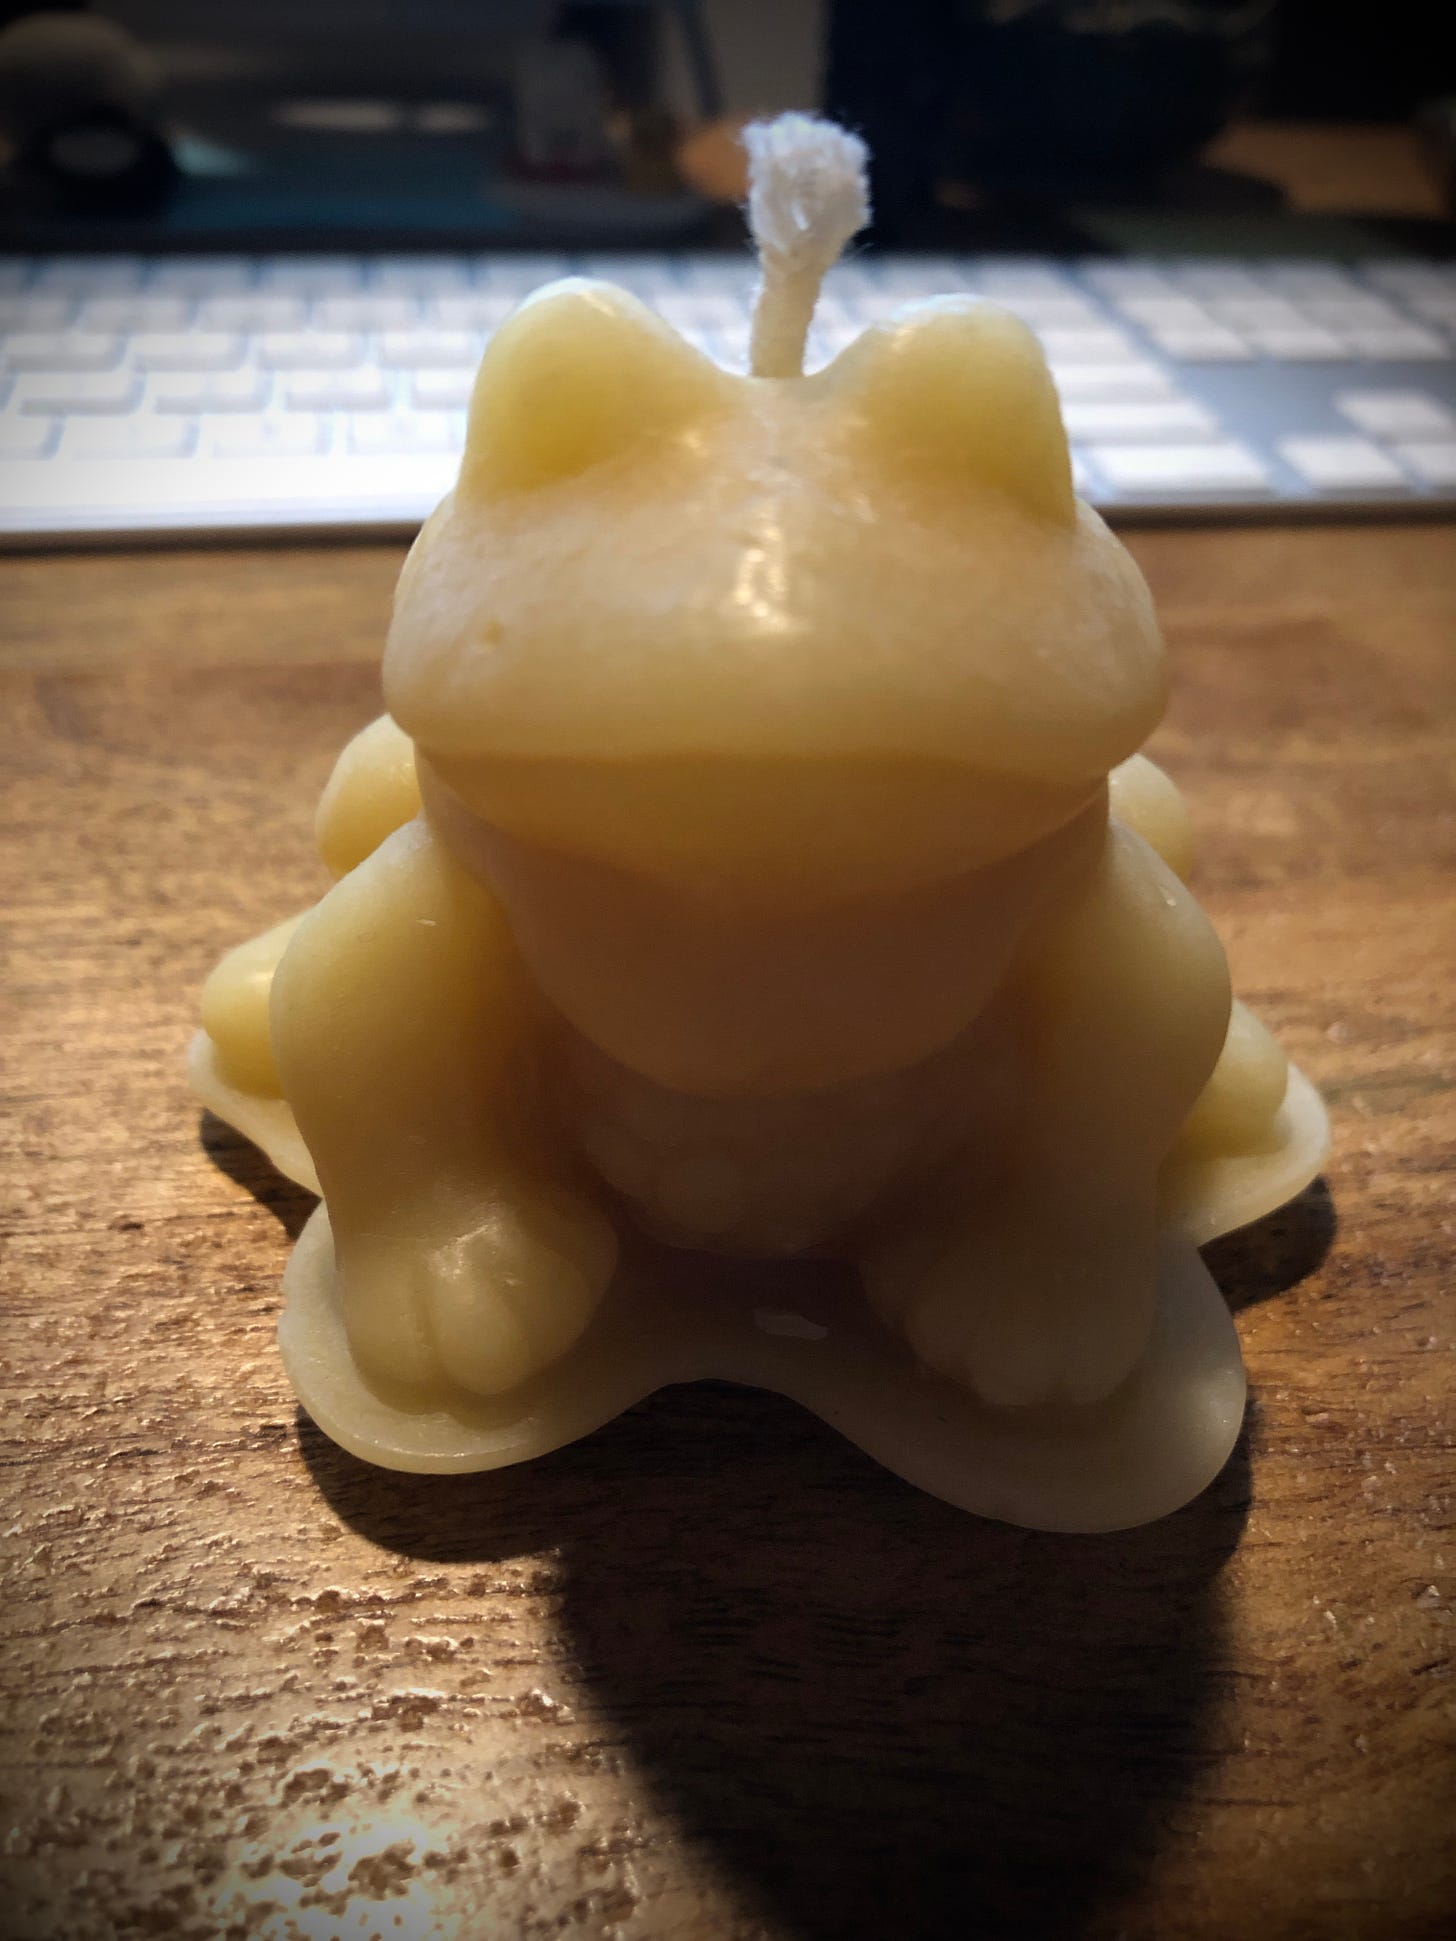 An almost yellow frog candle, almost smiling.